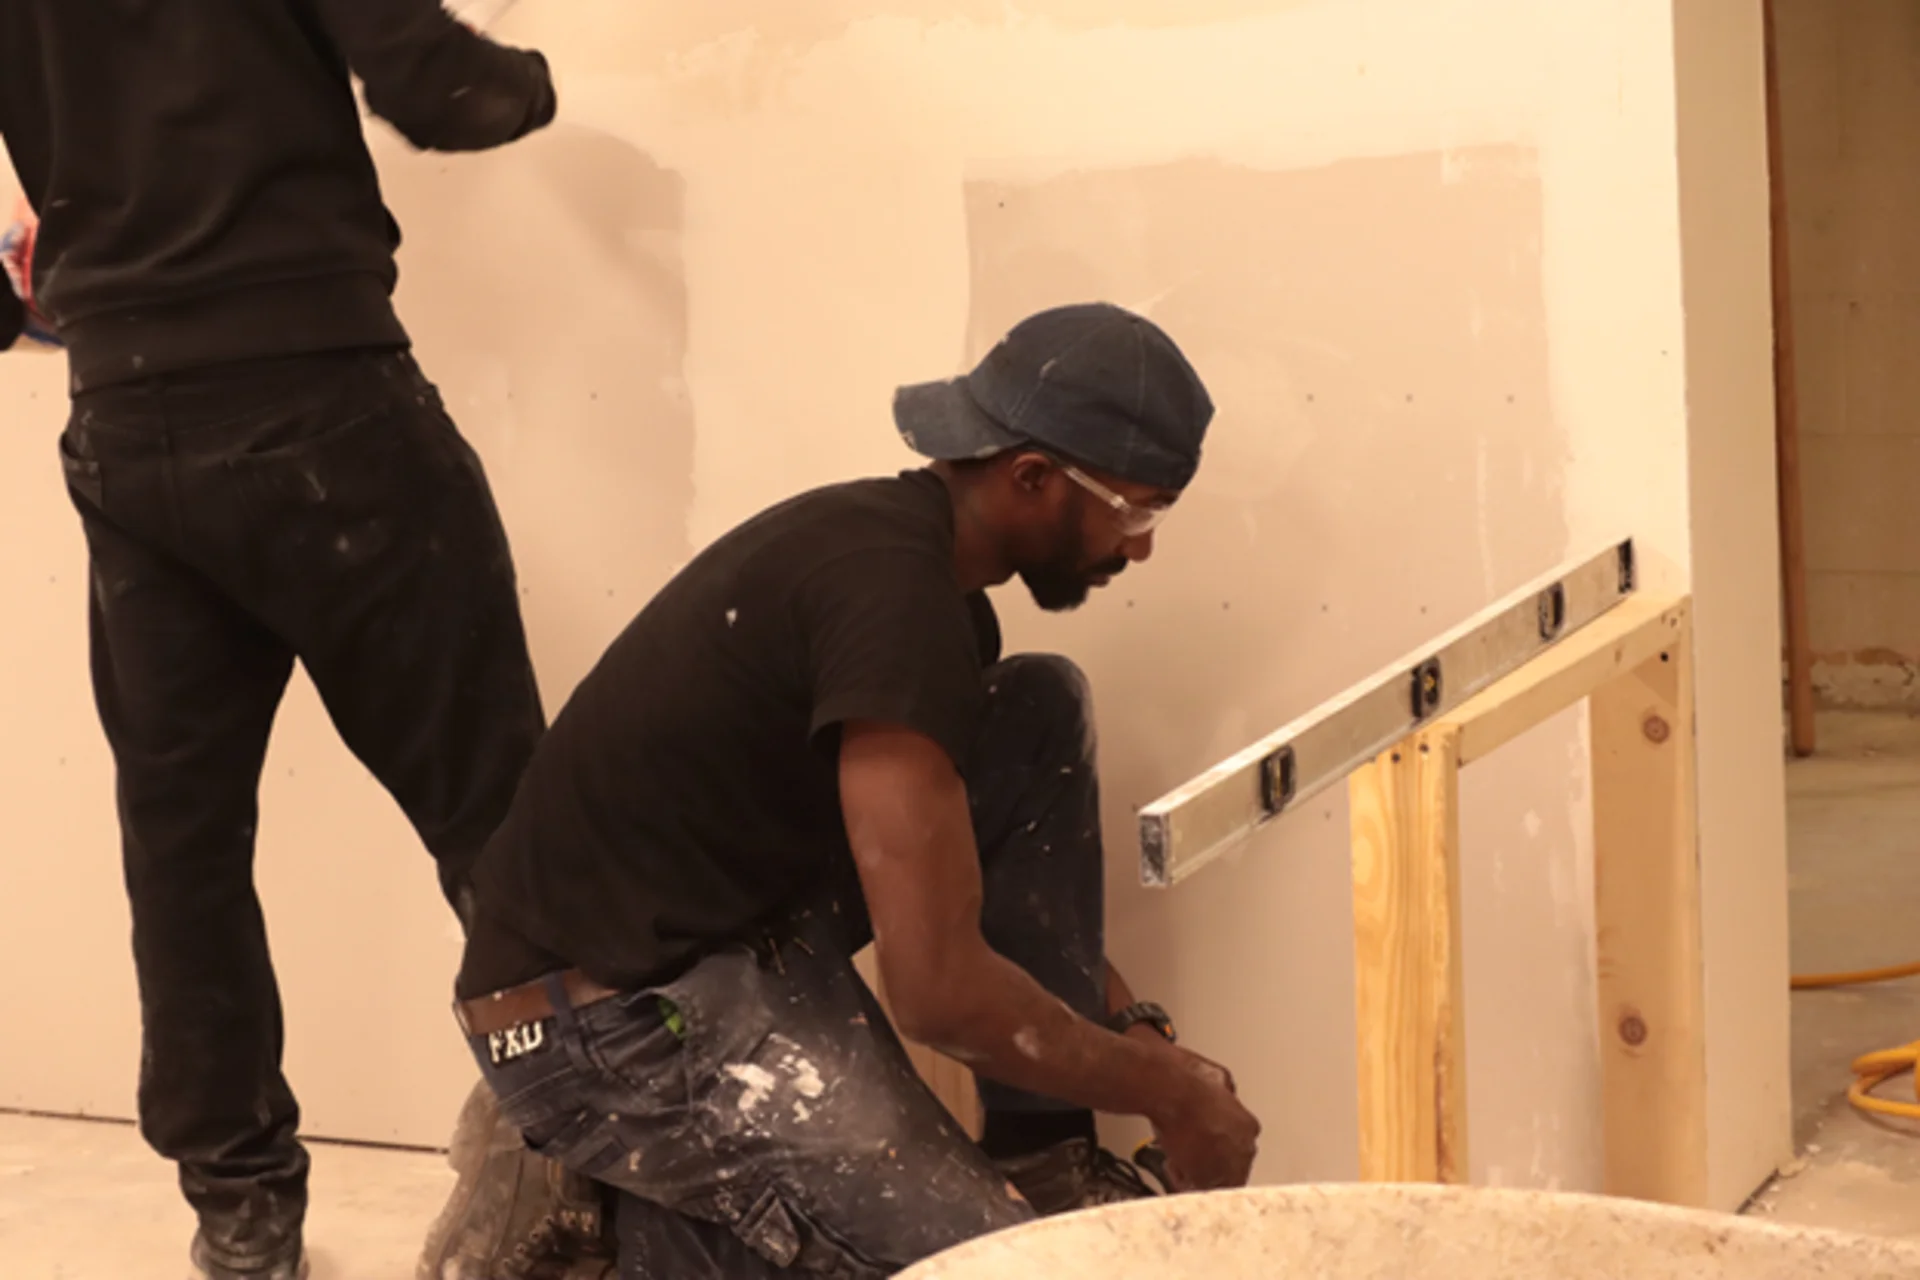 Tips For Landing Your First Job In The Drywall Industry